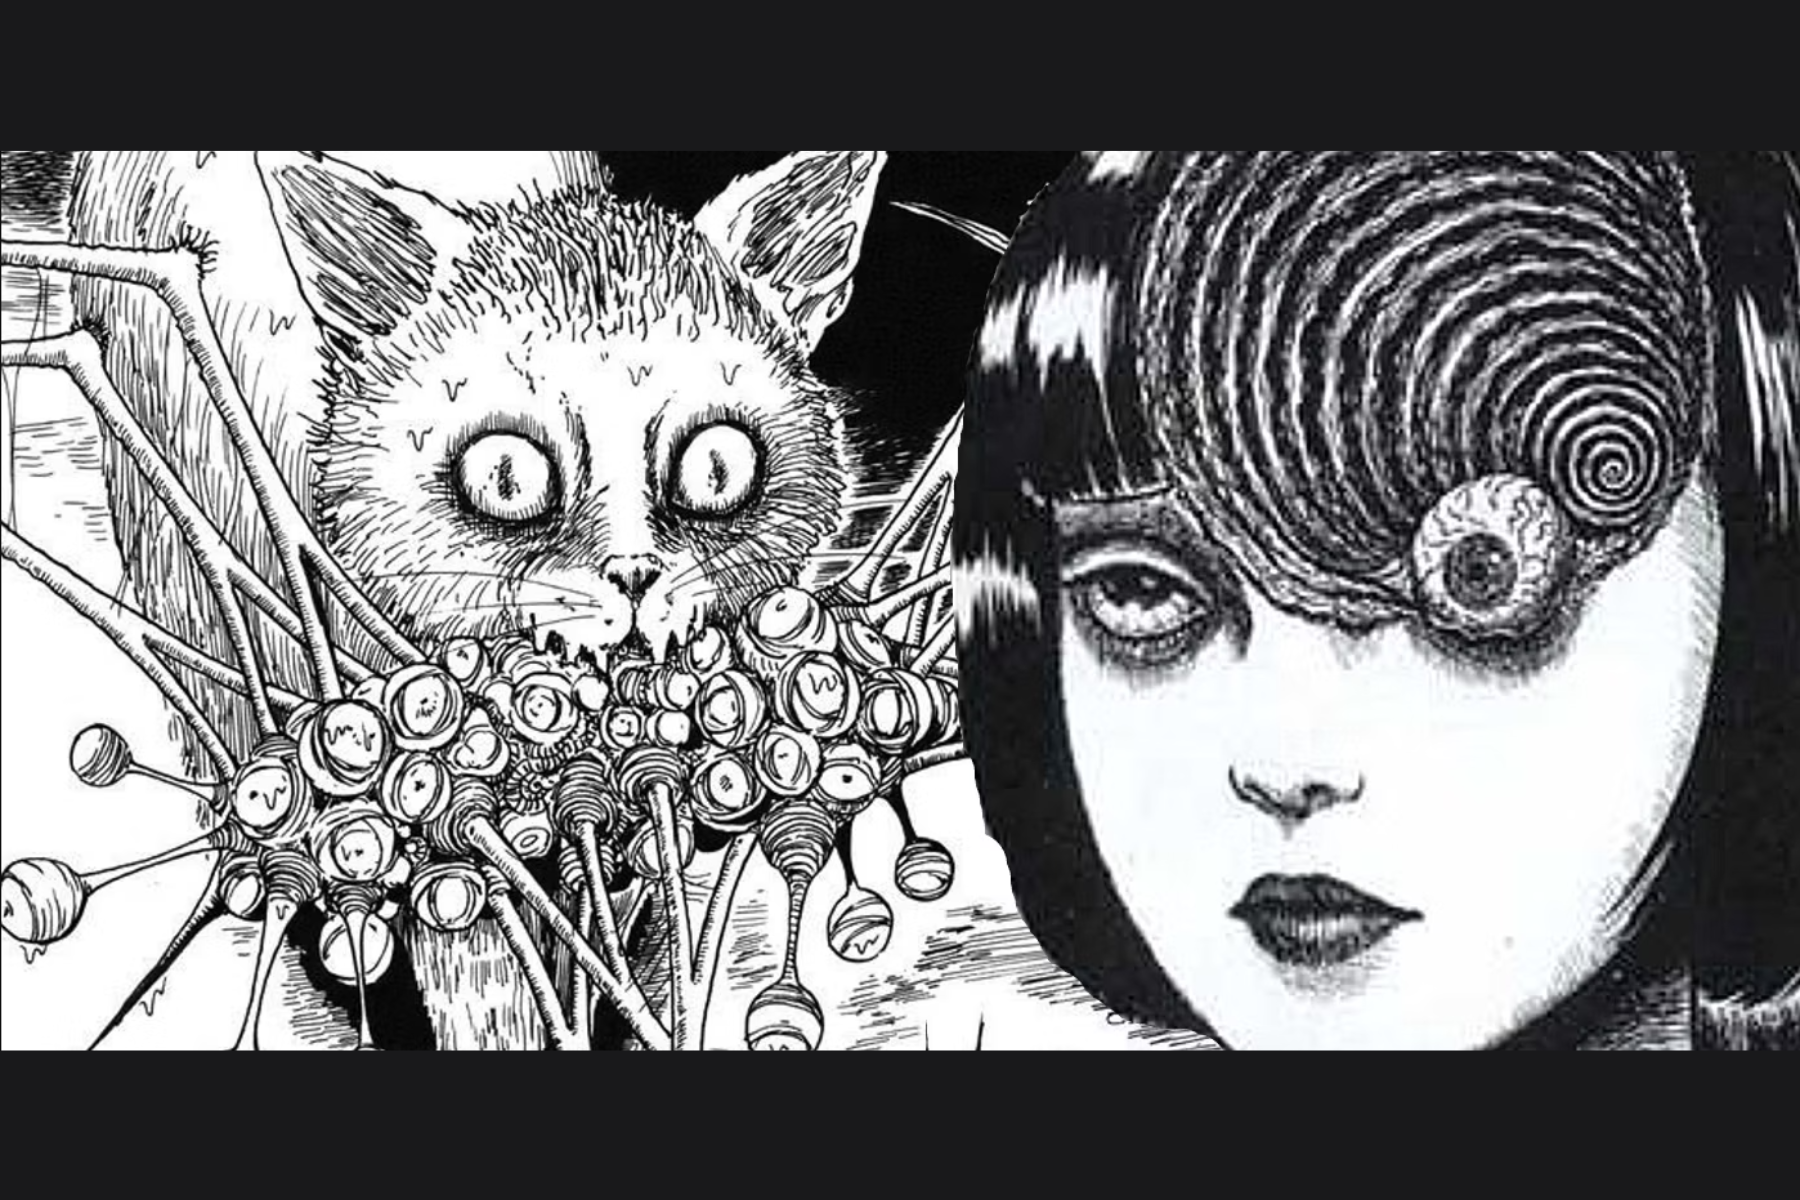 Horror Manga Quiz: Can You Guess the Junji Ito Book Based on its Cover?